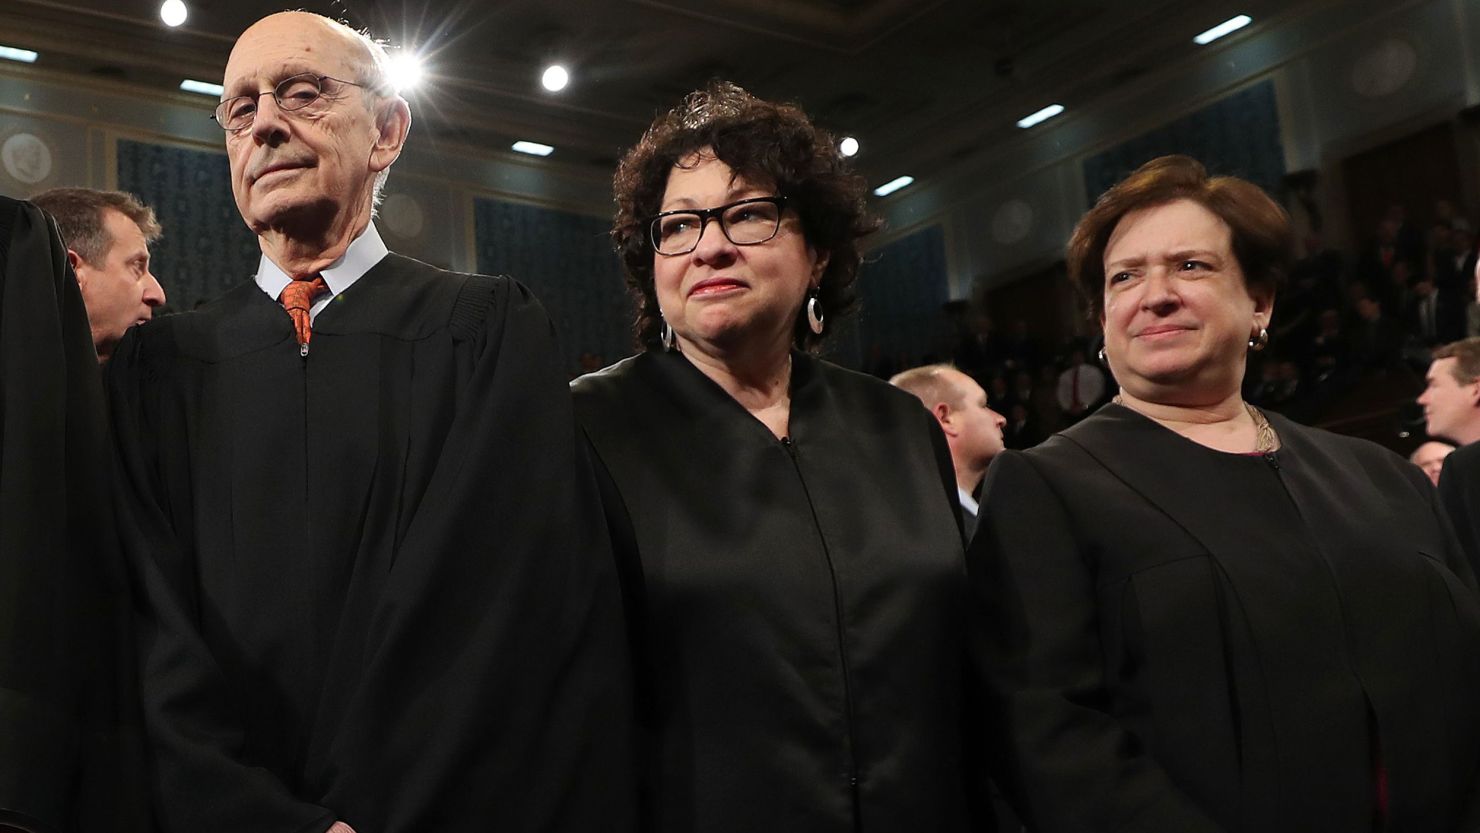 In this February 2017 file photo, Justices Stephen Breyer, Sonia Sotomayor and Elena Kagan attend a speech at the US Capitol by President Donald Trump.